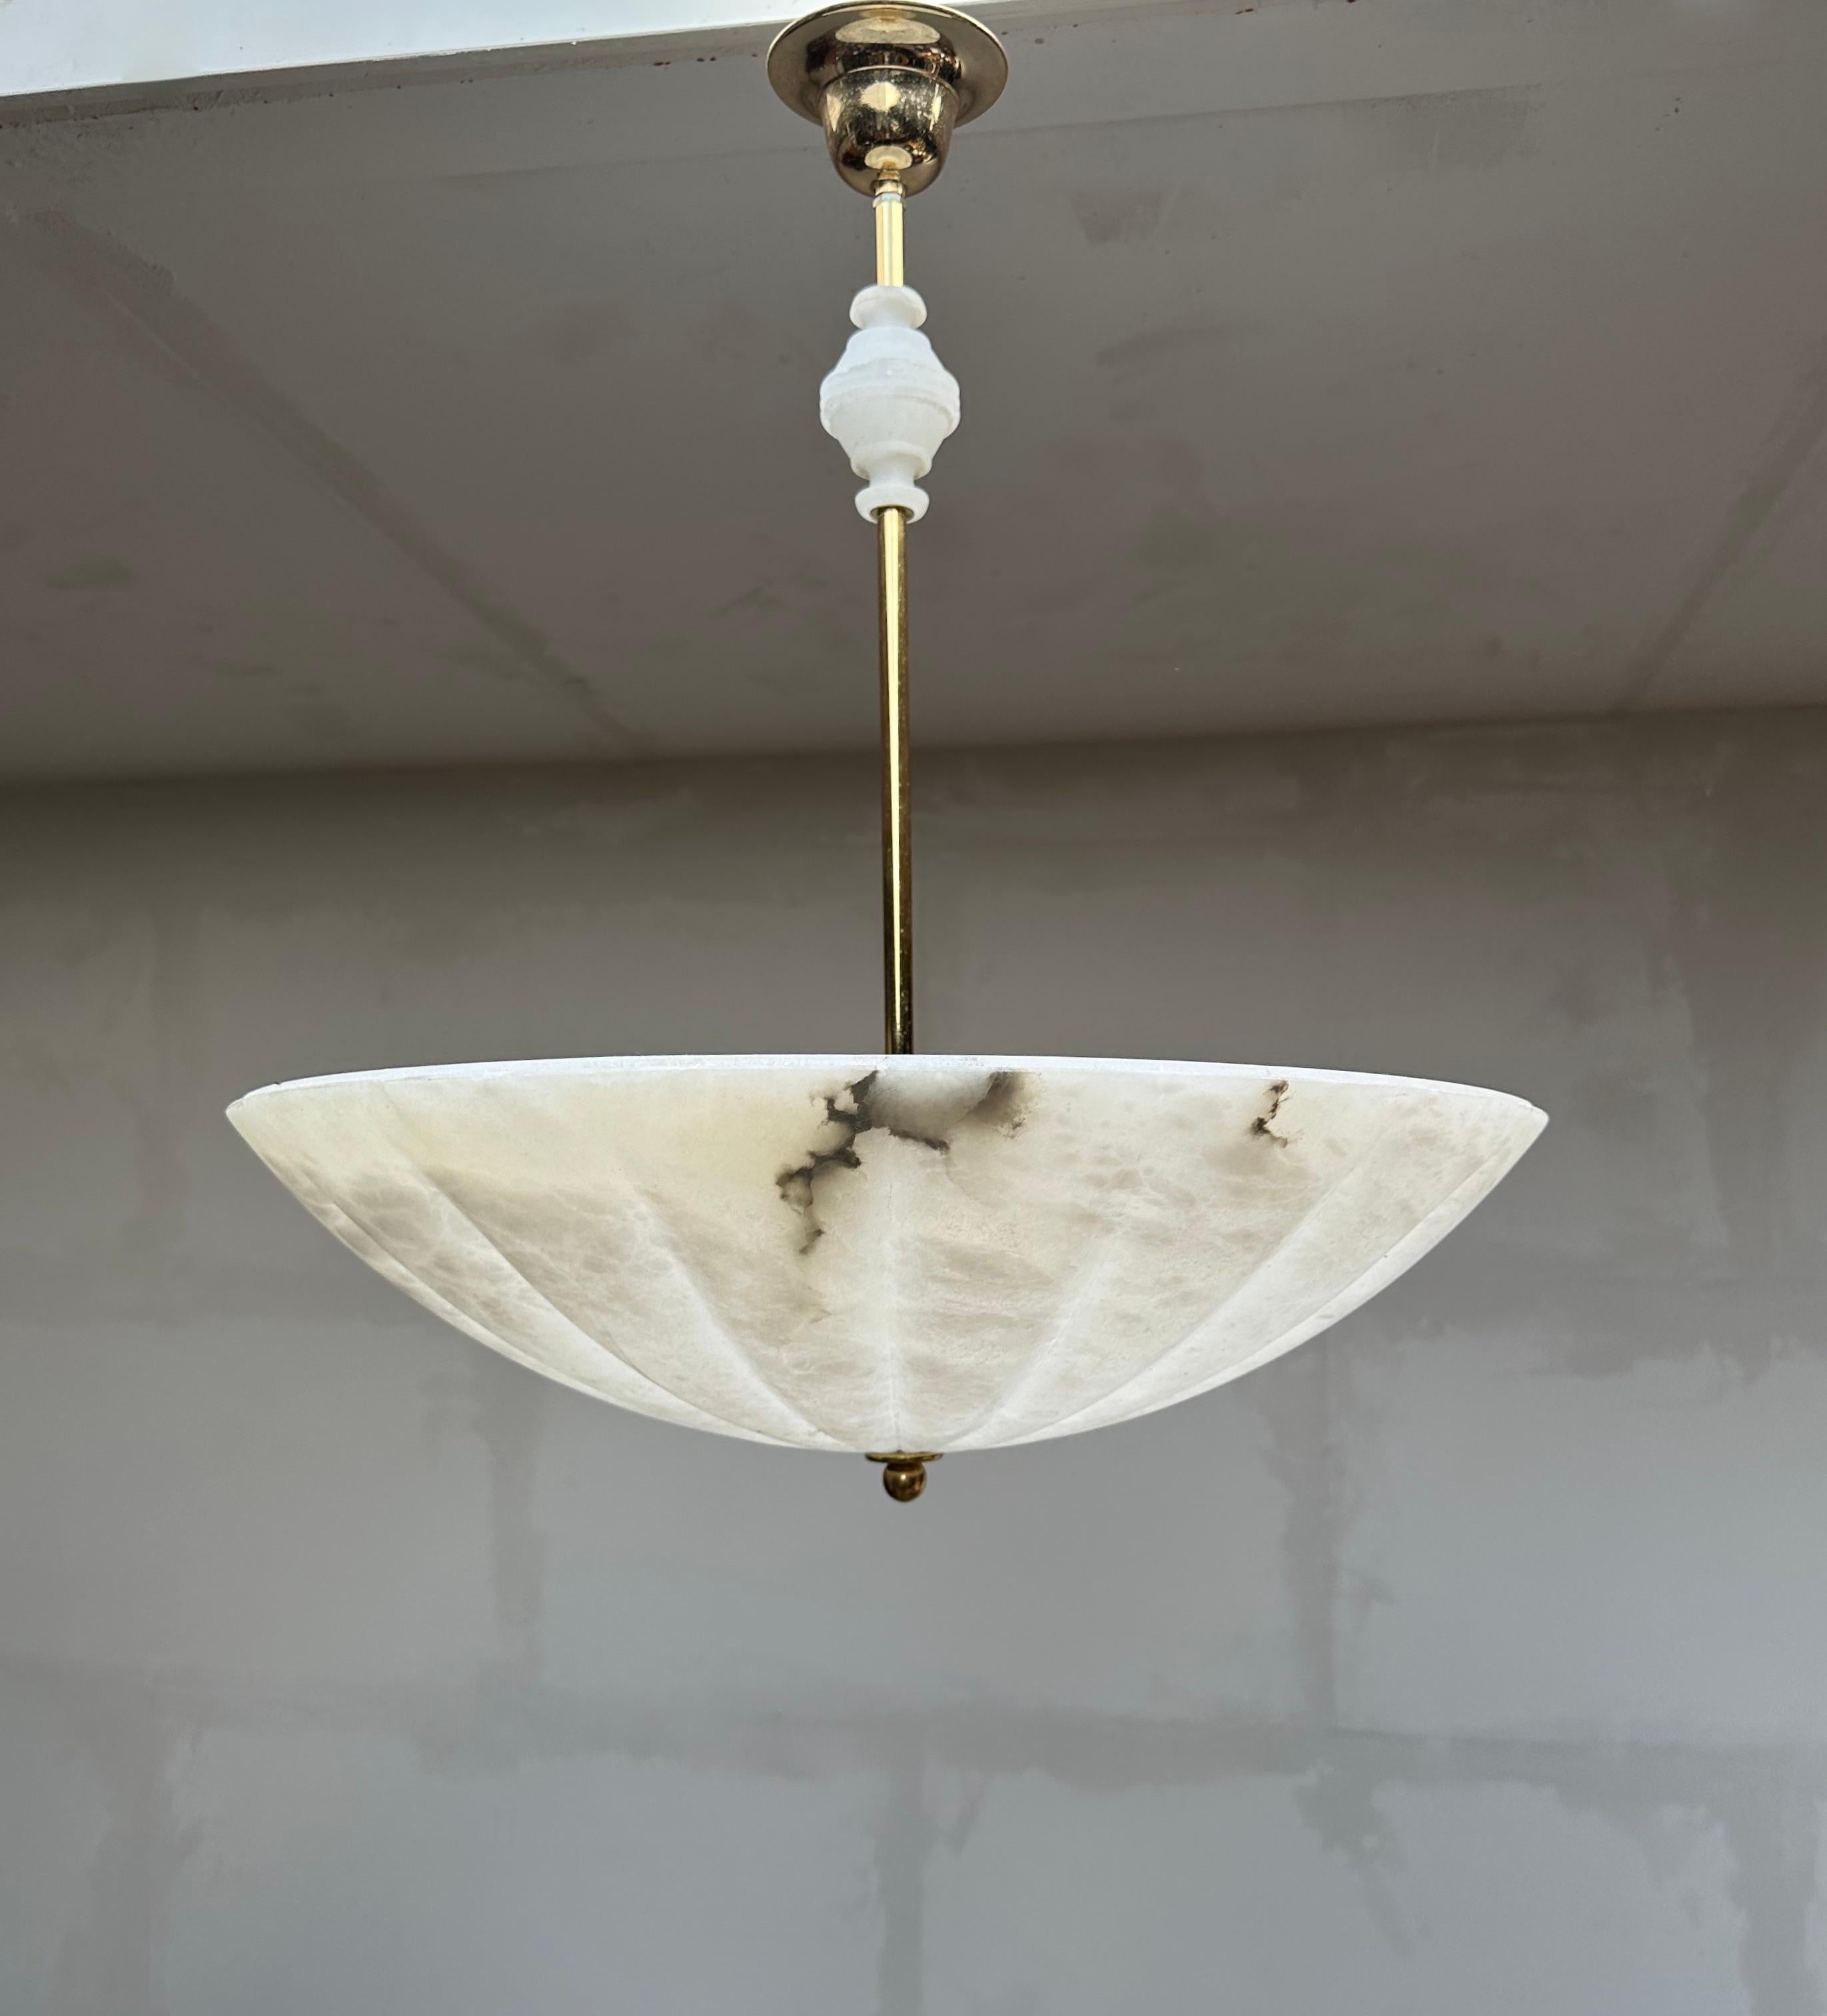 Remarkable, Midcentury modern design and Art Deco style alabaster light fixture.

For the collectors of rare and stylish design light fixtures of wonderful materials we also have this large and great looking 'upside down umbrella pendant light'.